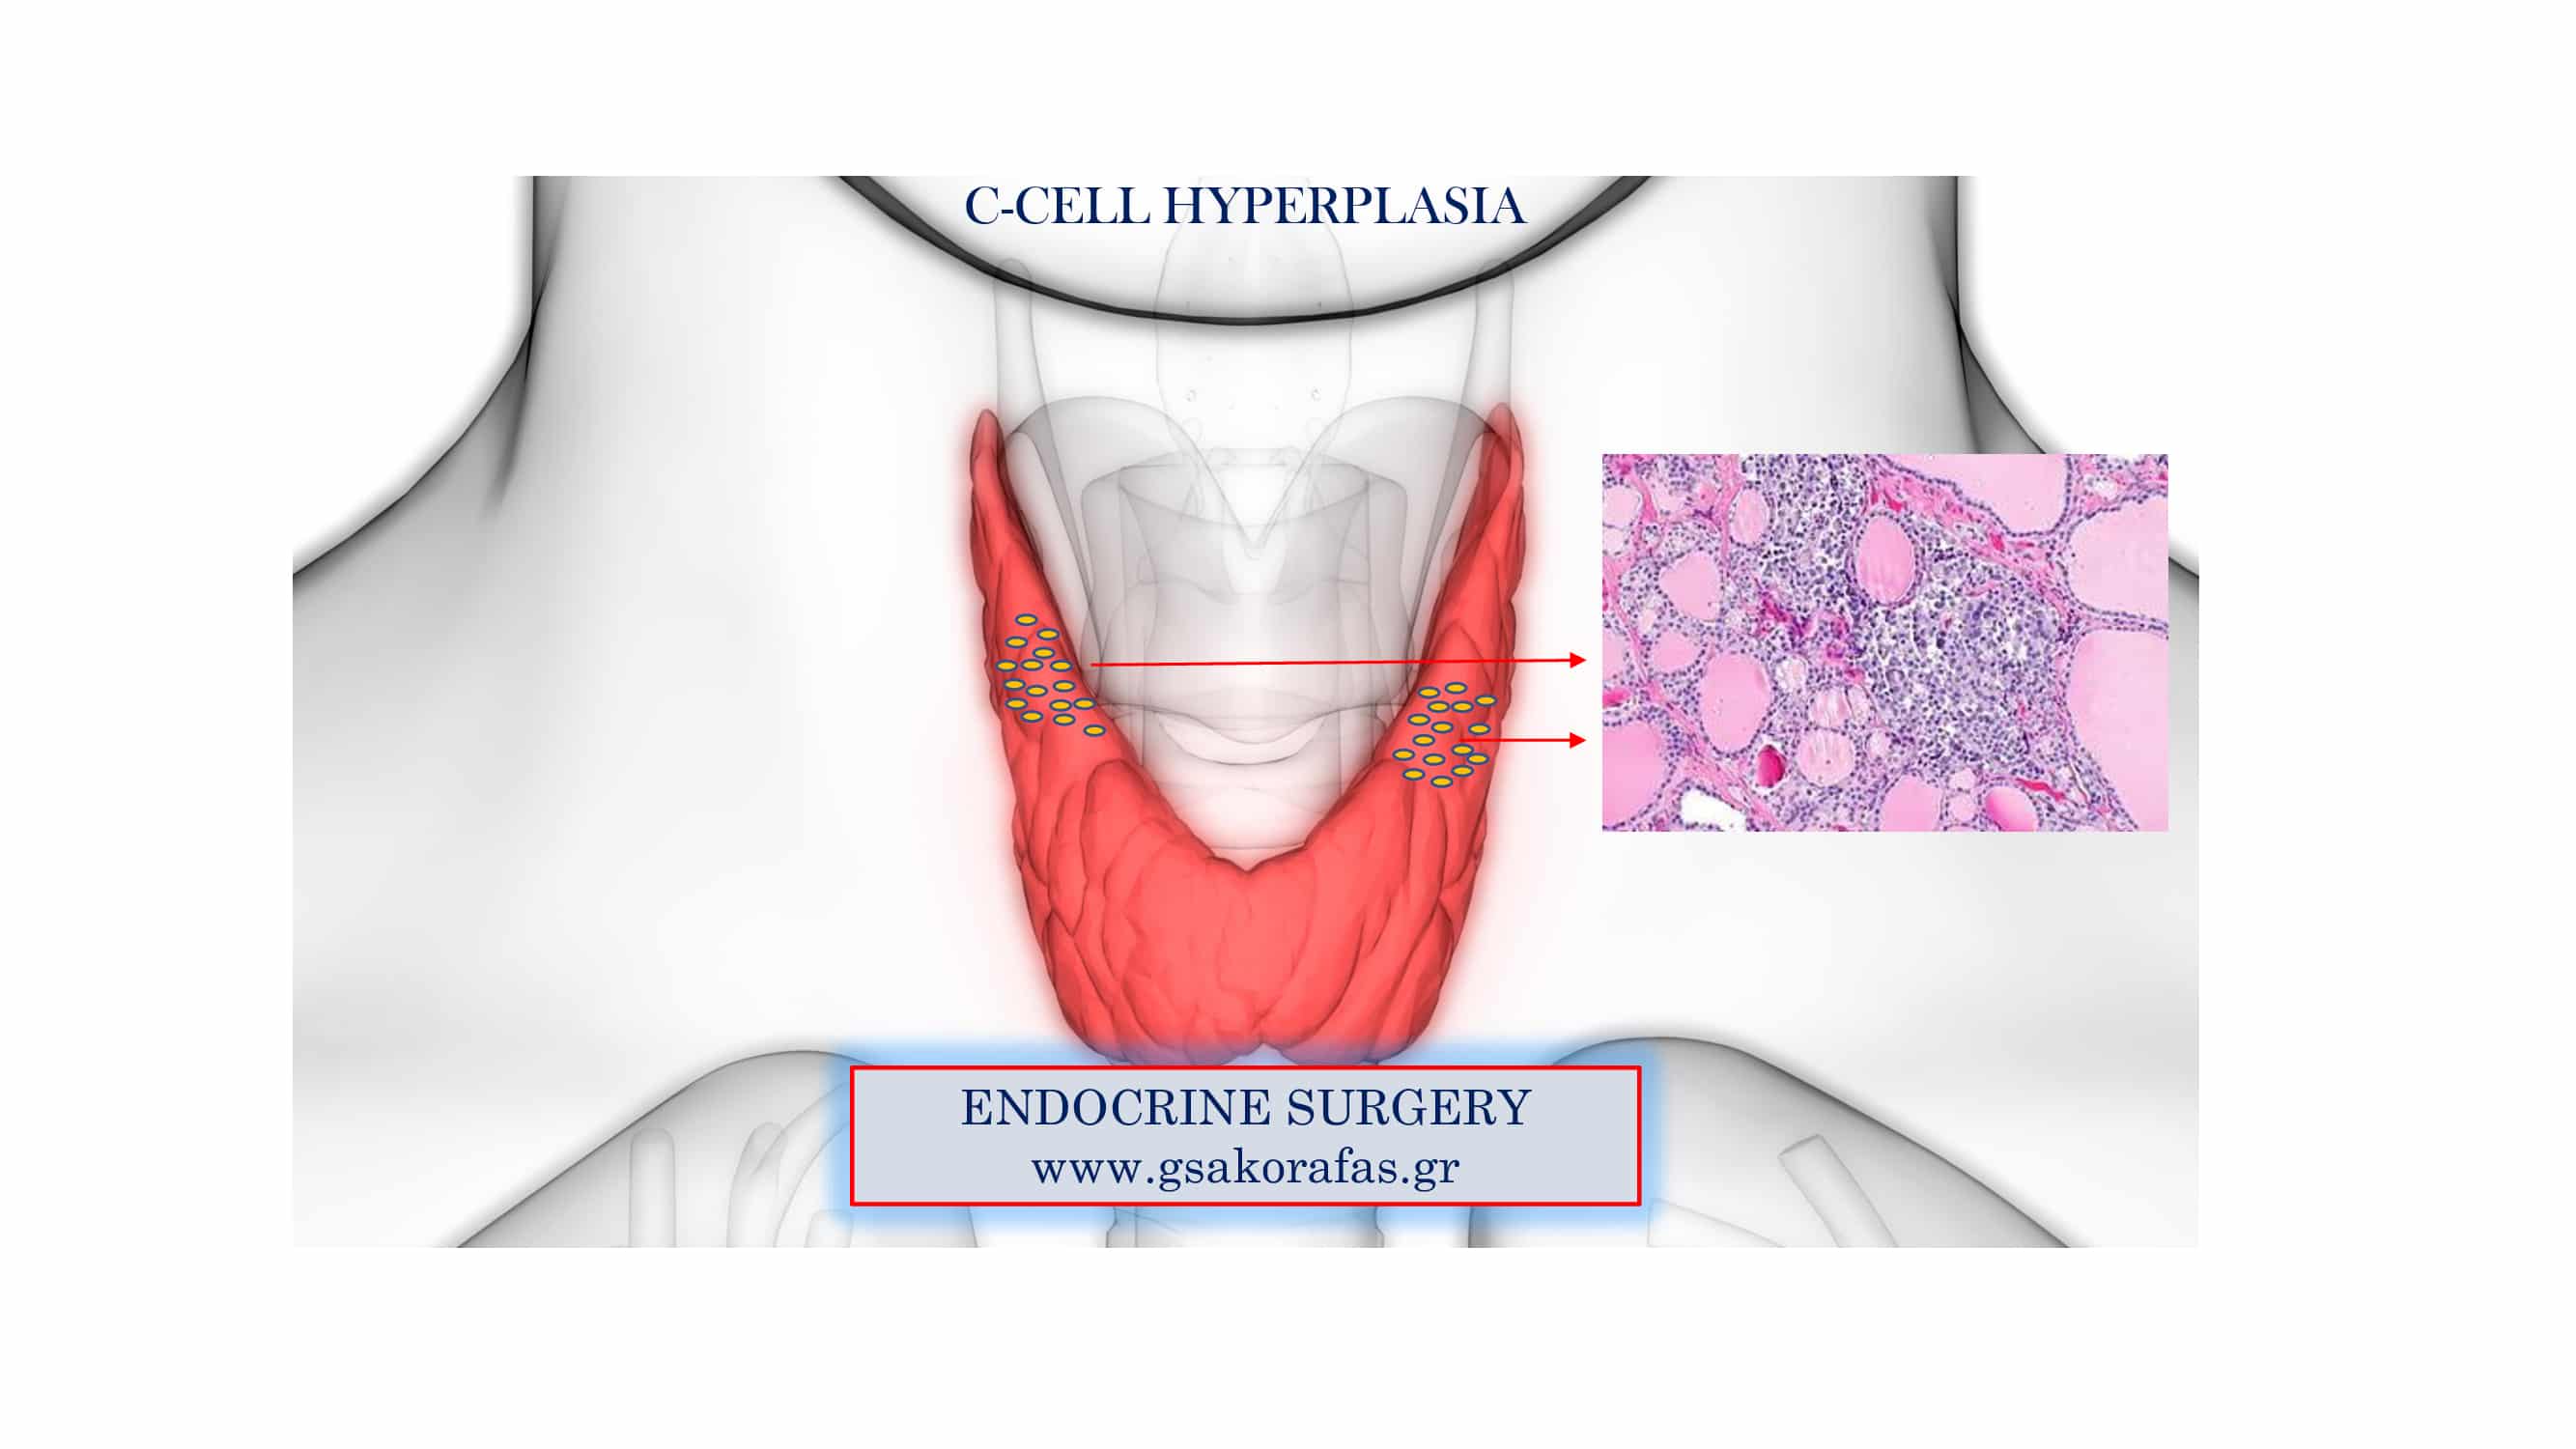 C-cell hyperplasia as an incidental finding following thyroidectomy – practical significance